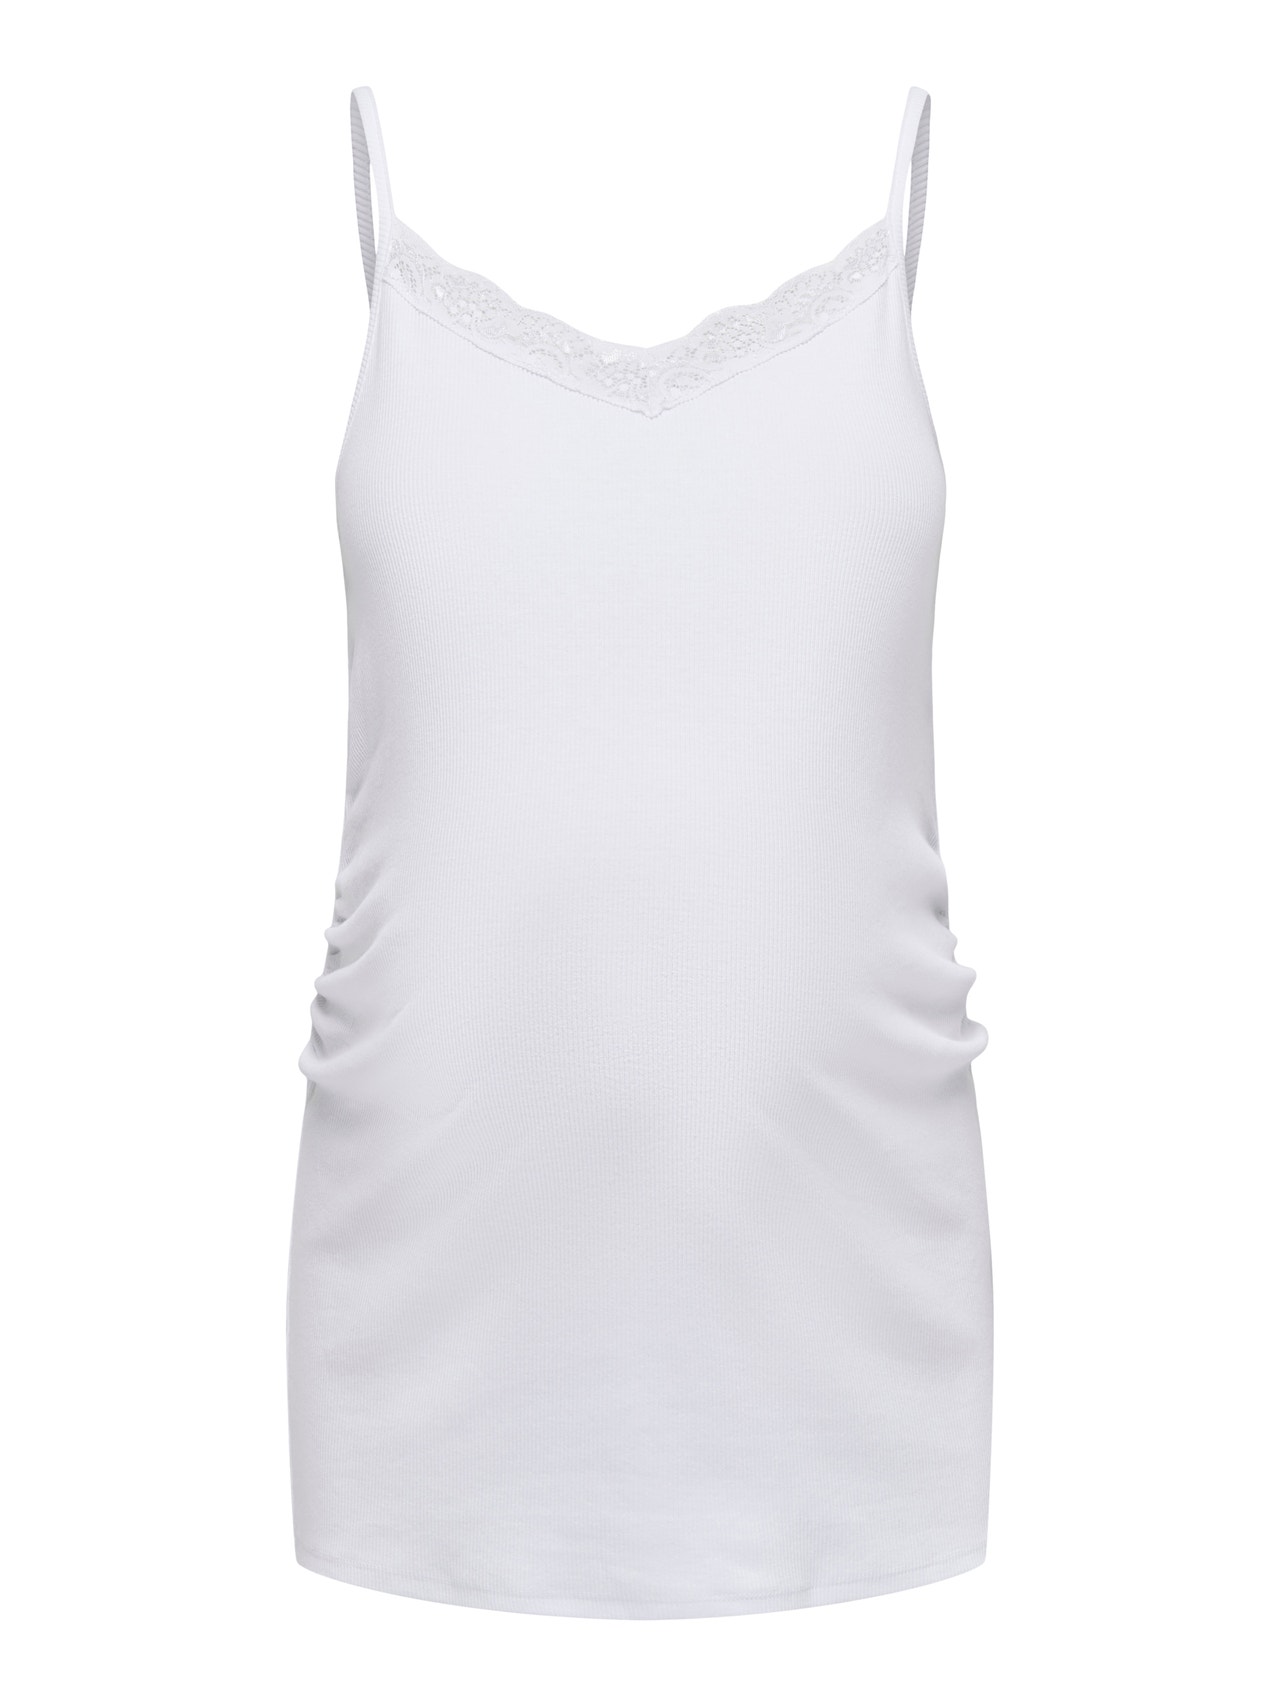 ONLY Mama lang singlet top -White - 15303324